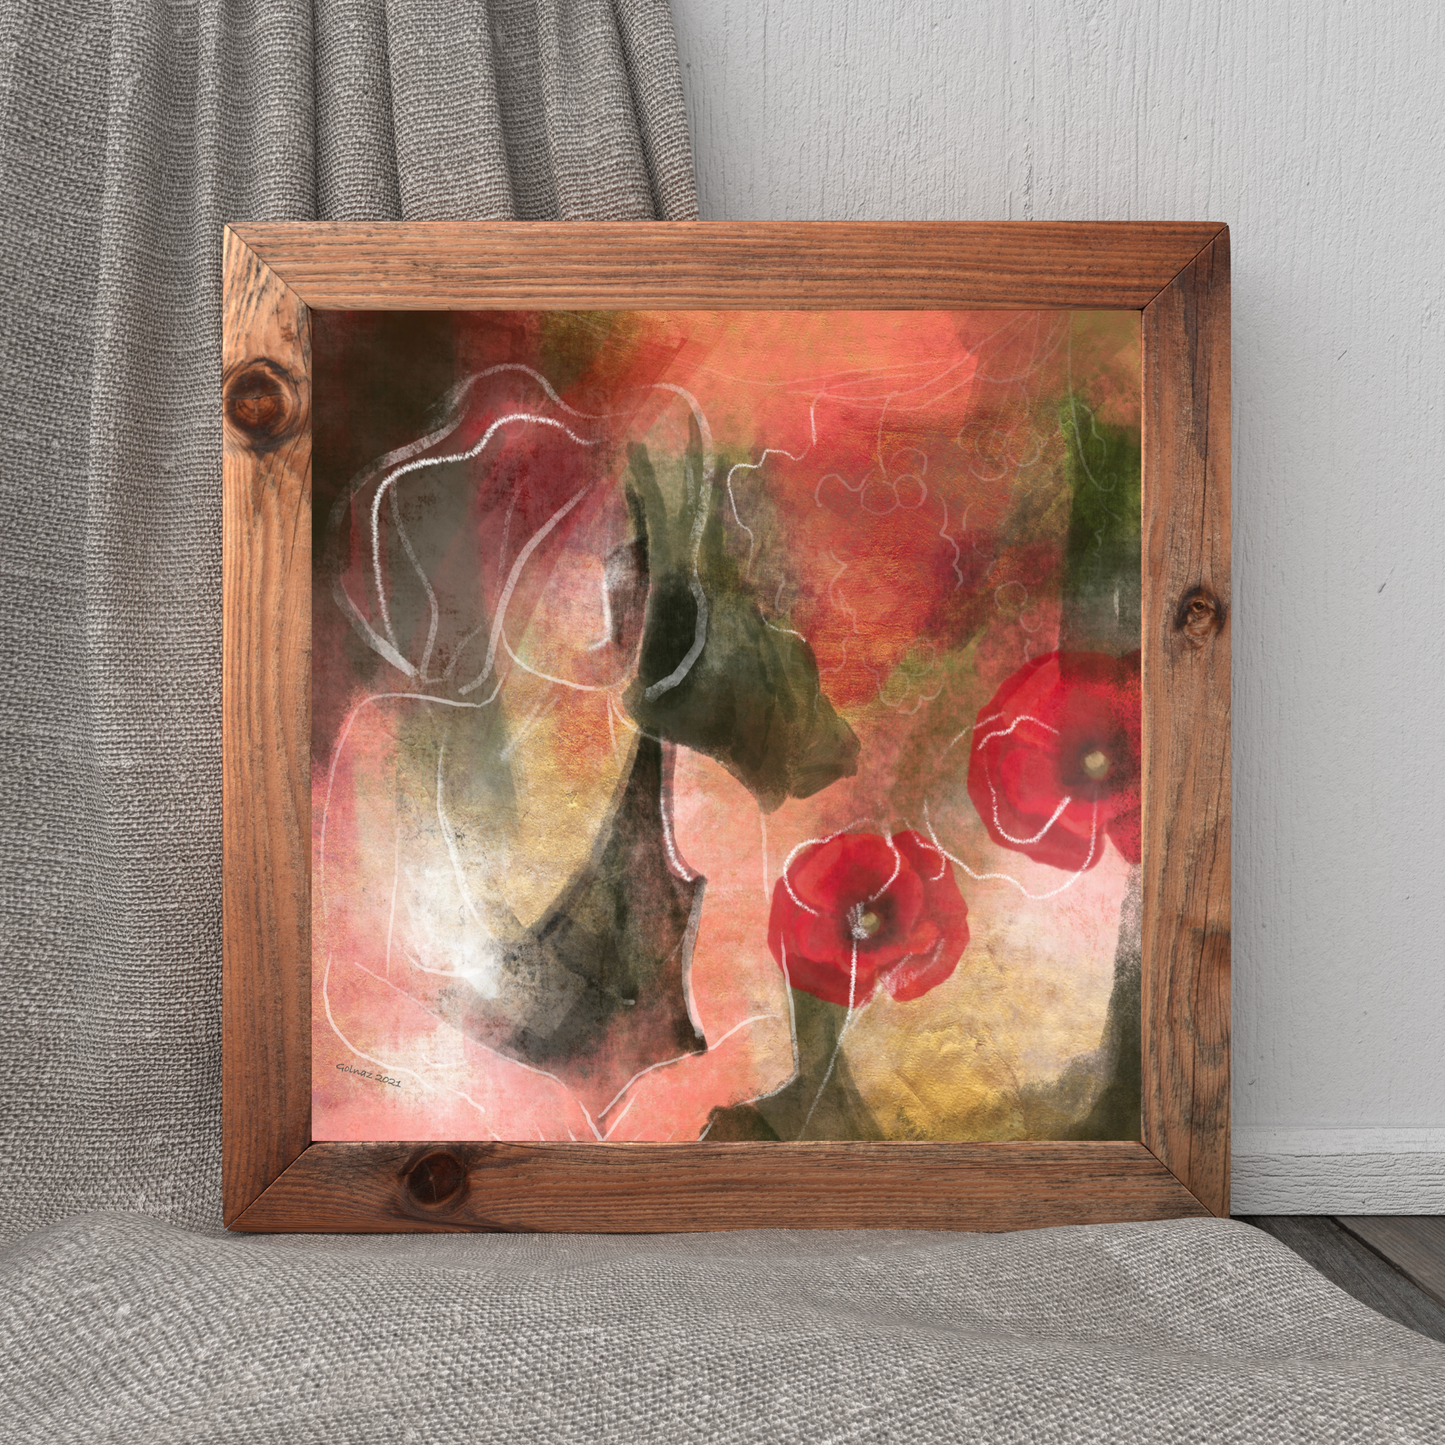 The Dangerous Beauty painting by ArisaTeam in a wooden frame and on a curtain